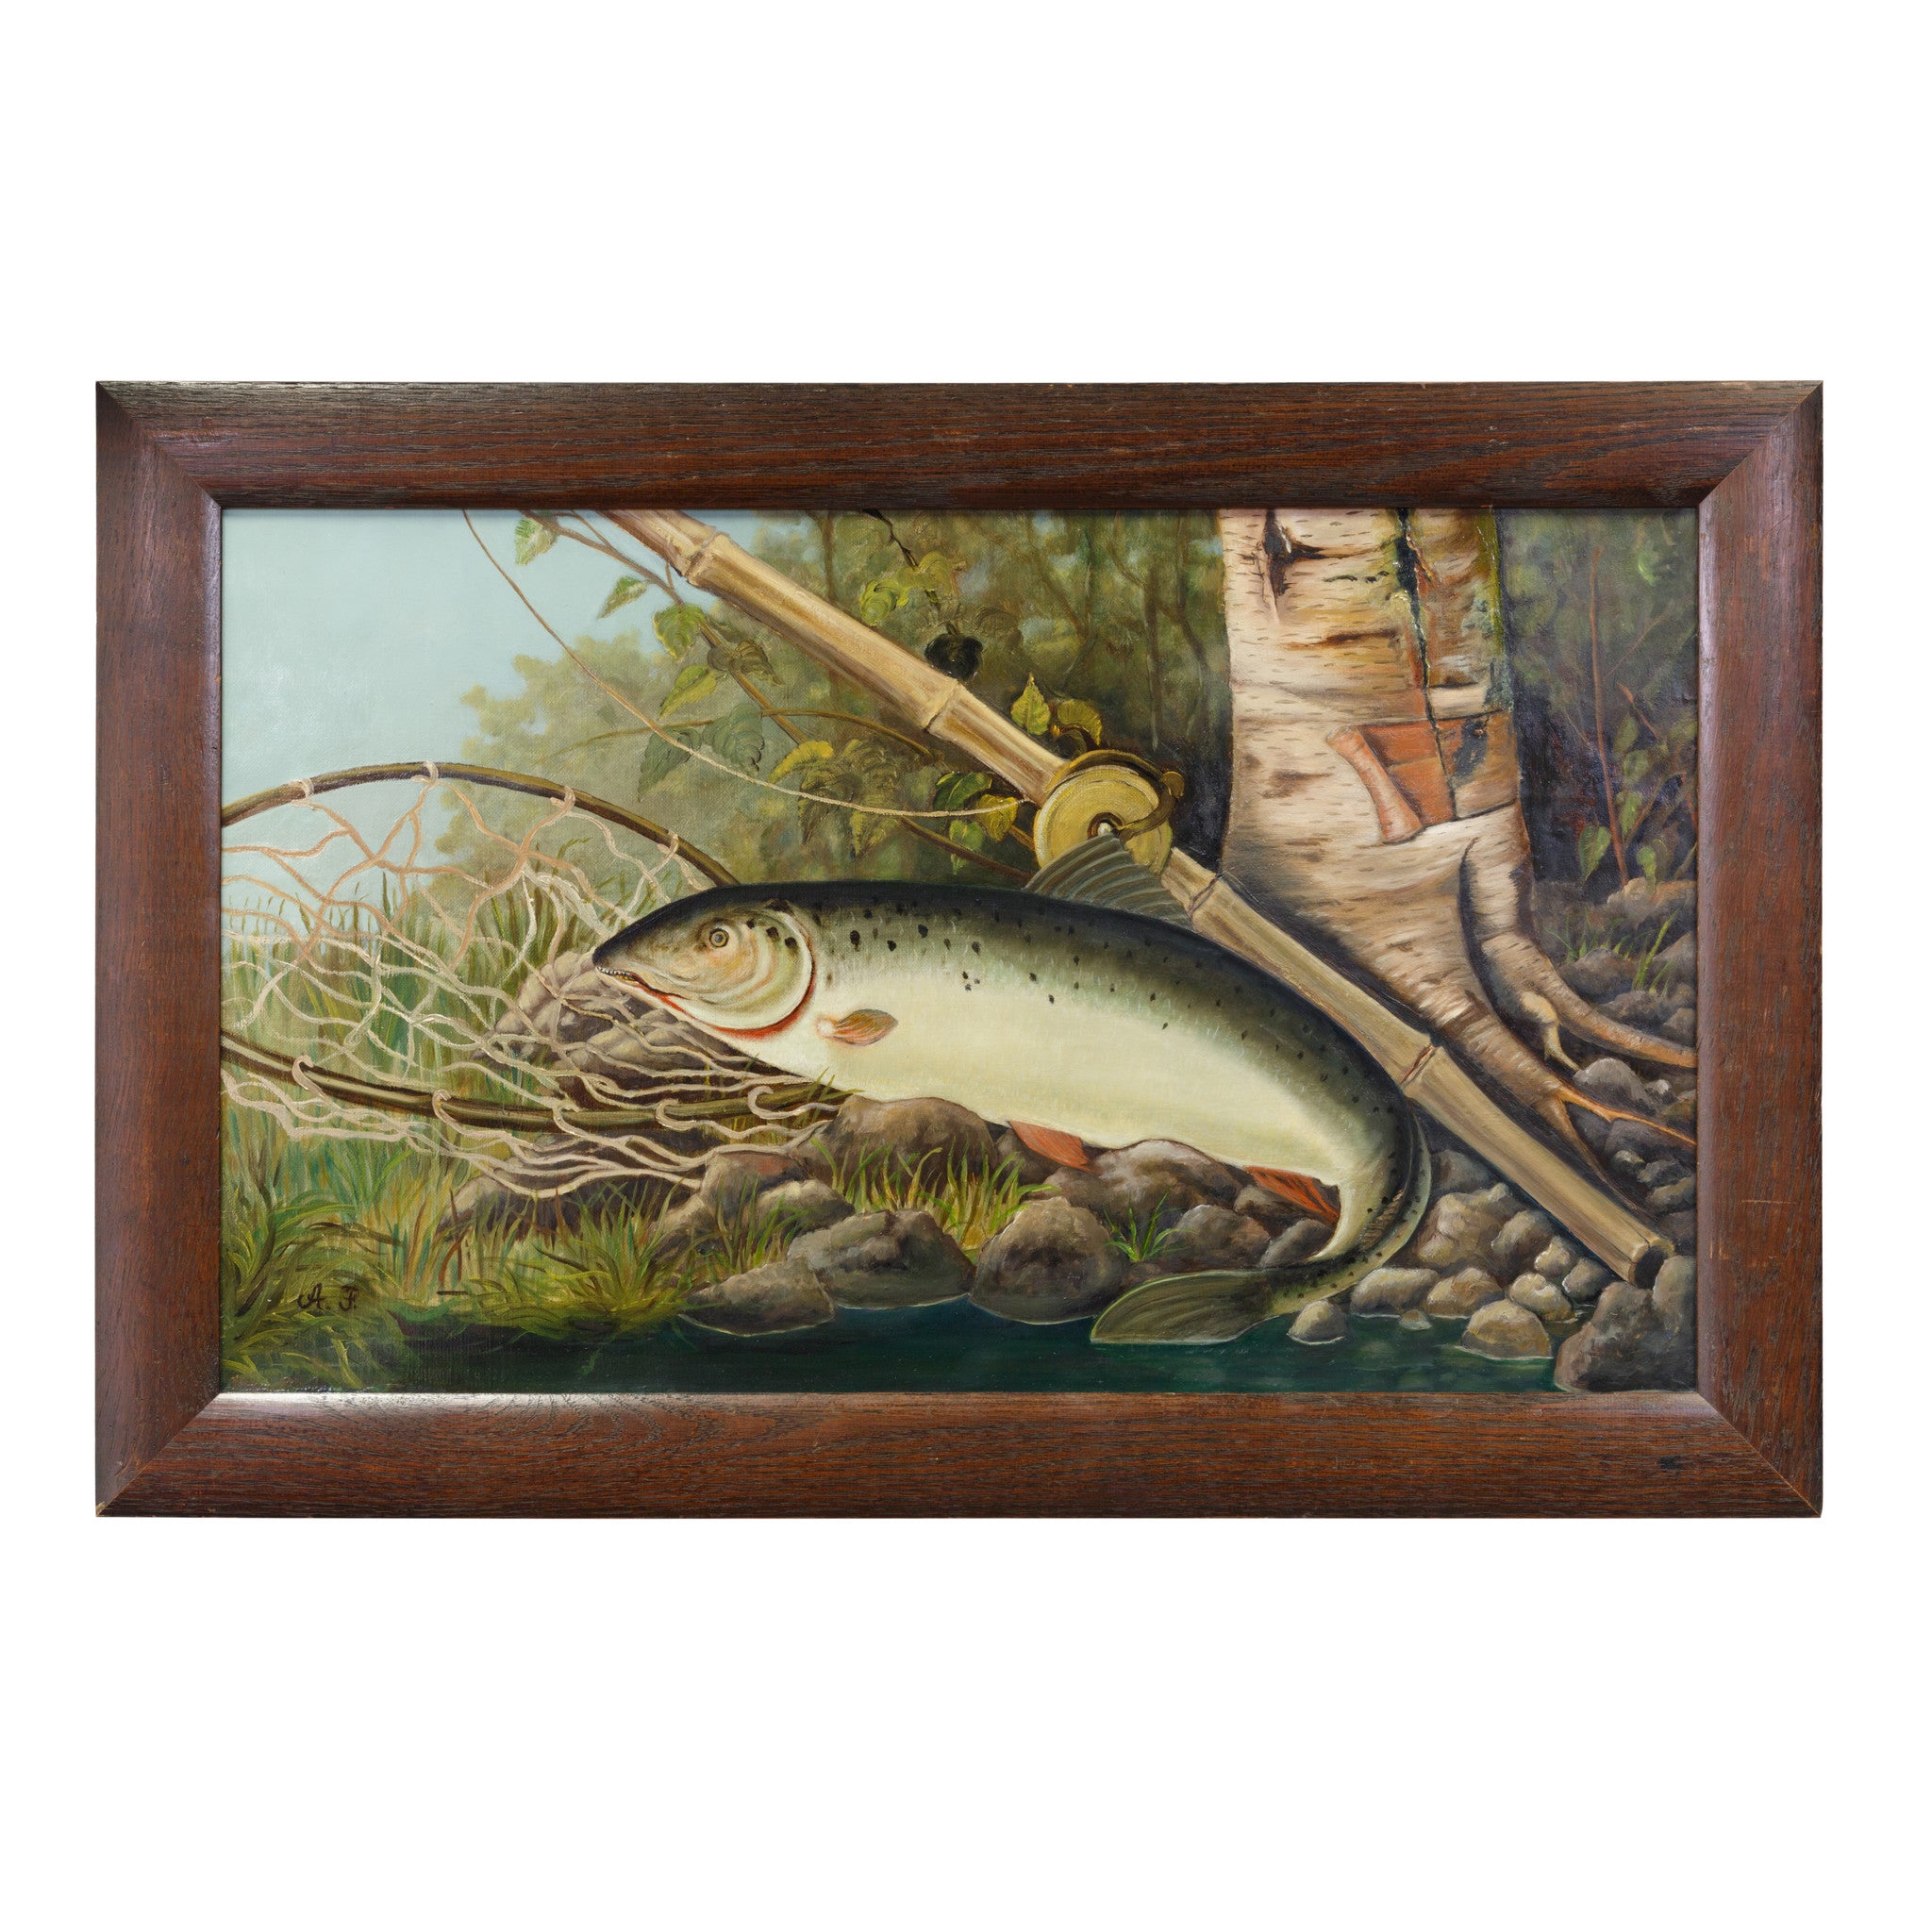 "Trout by the Brook"